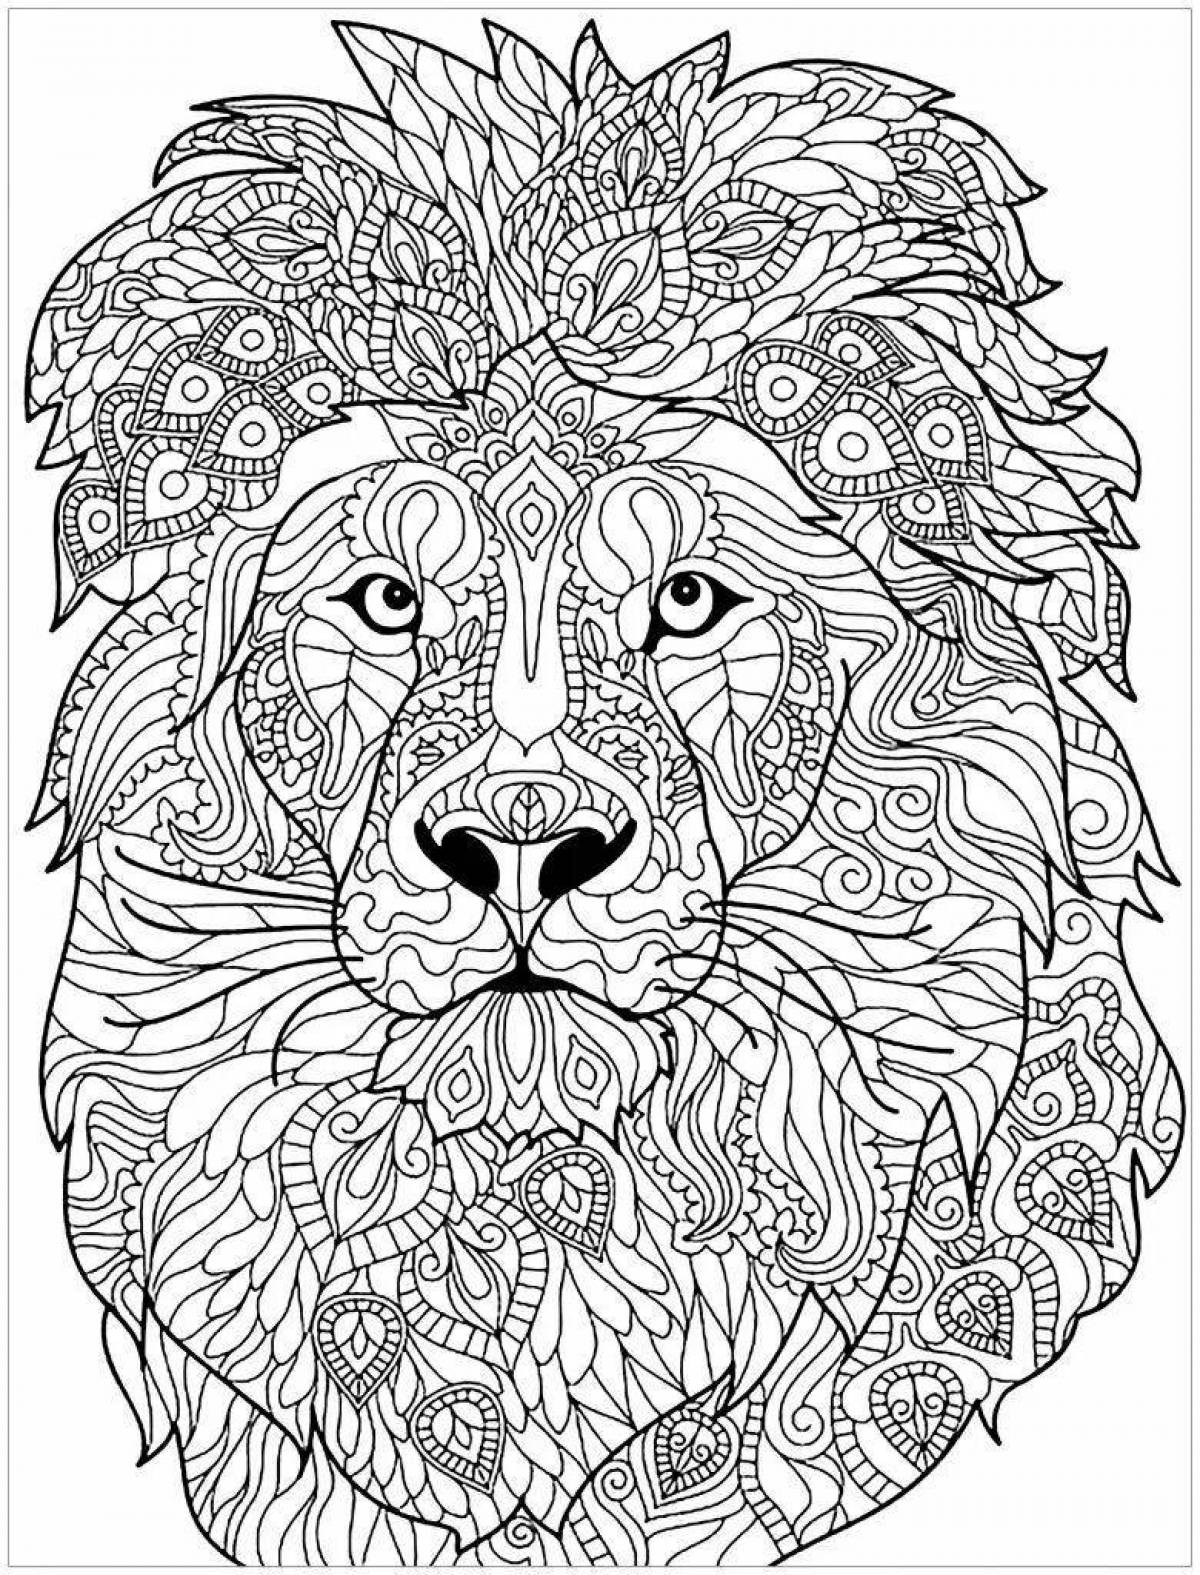 Charismatic anti-stress seal coloring page